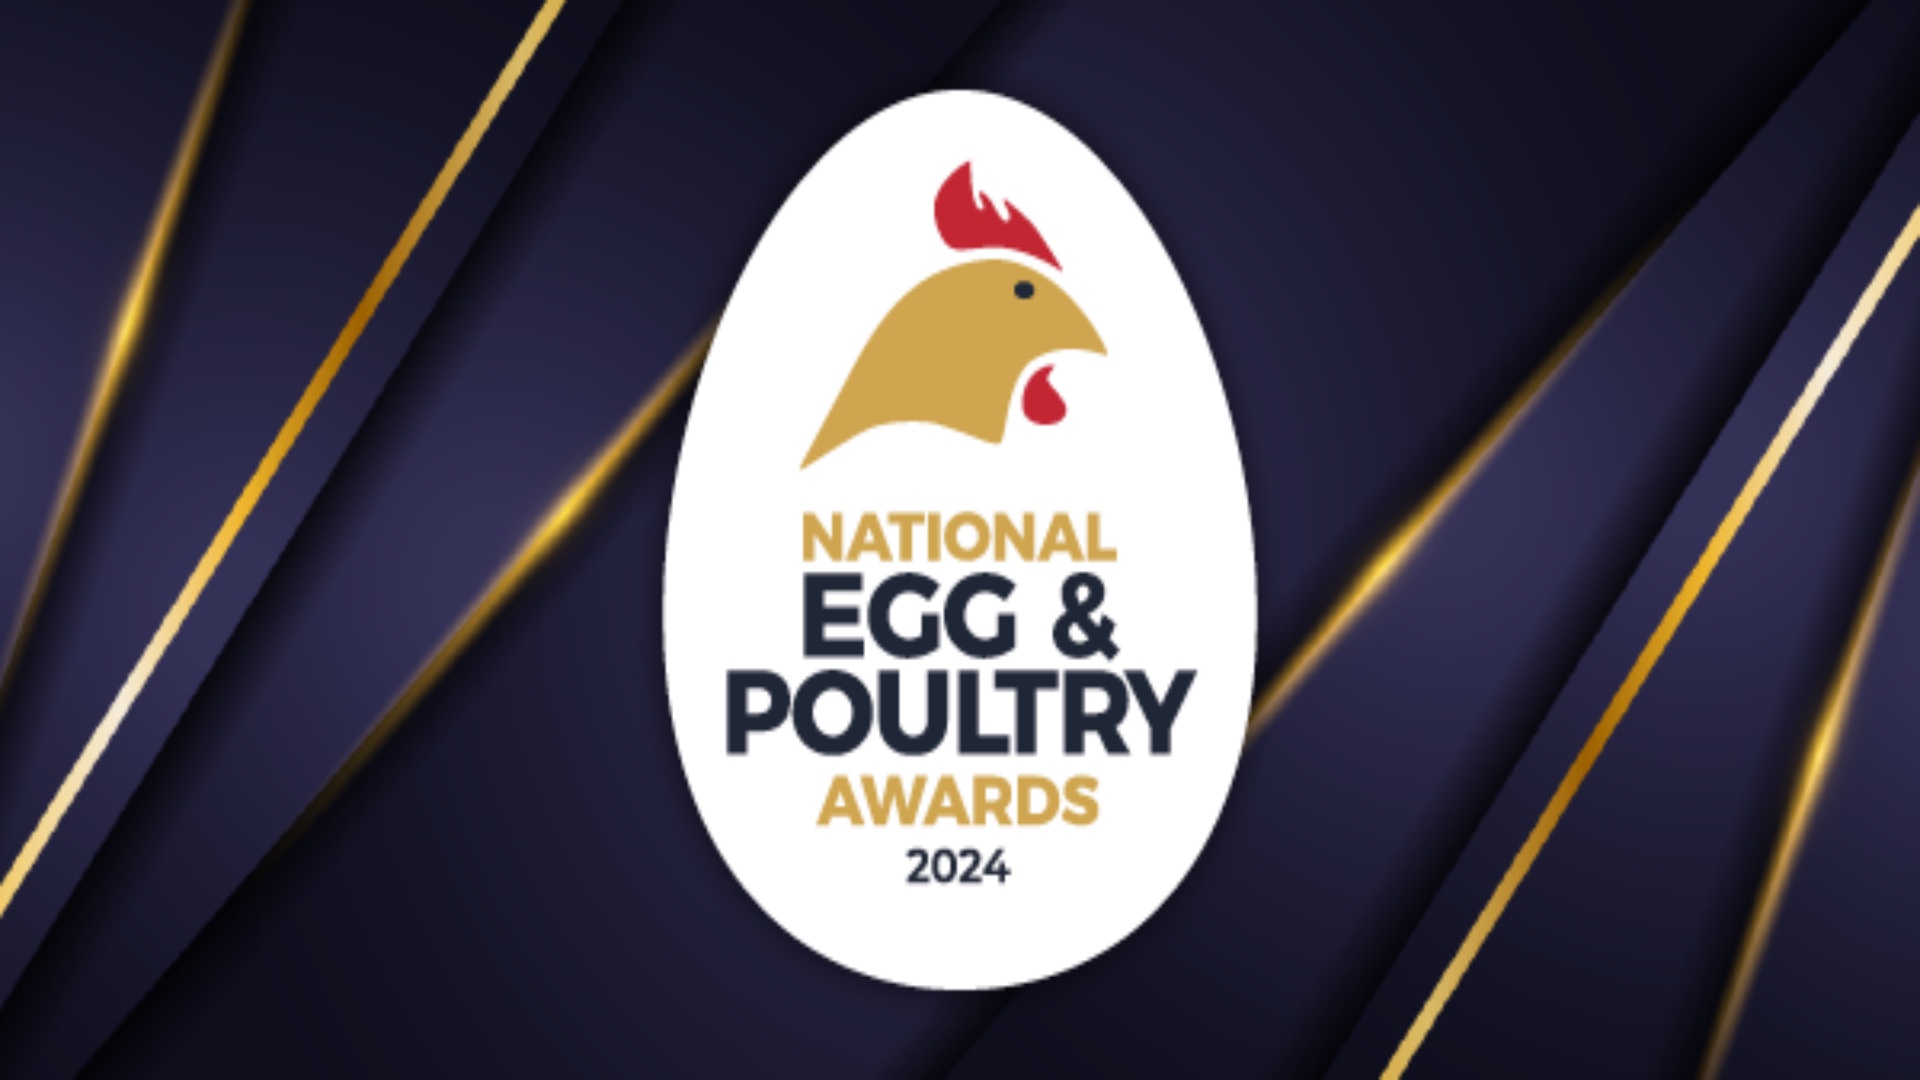 Eggbase Are Finalists At The National Egg & Poultry Awards 2024!